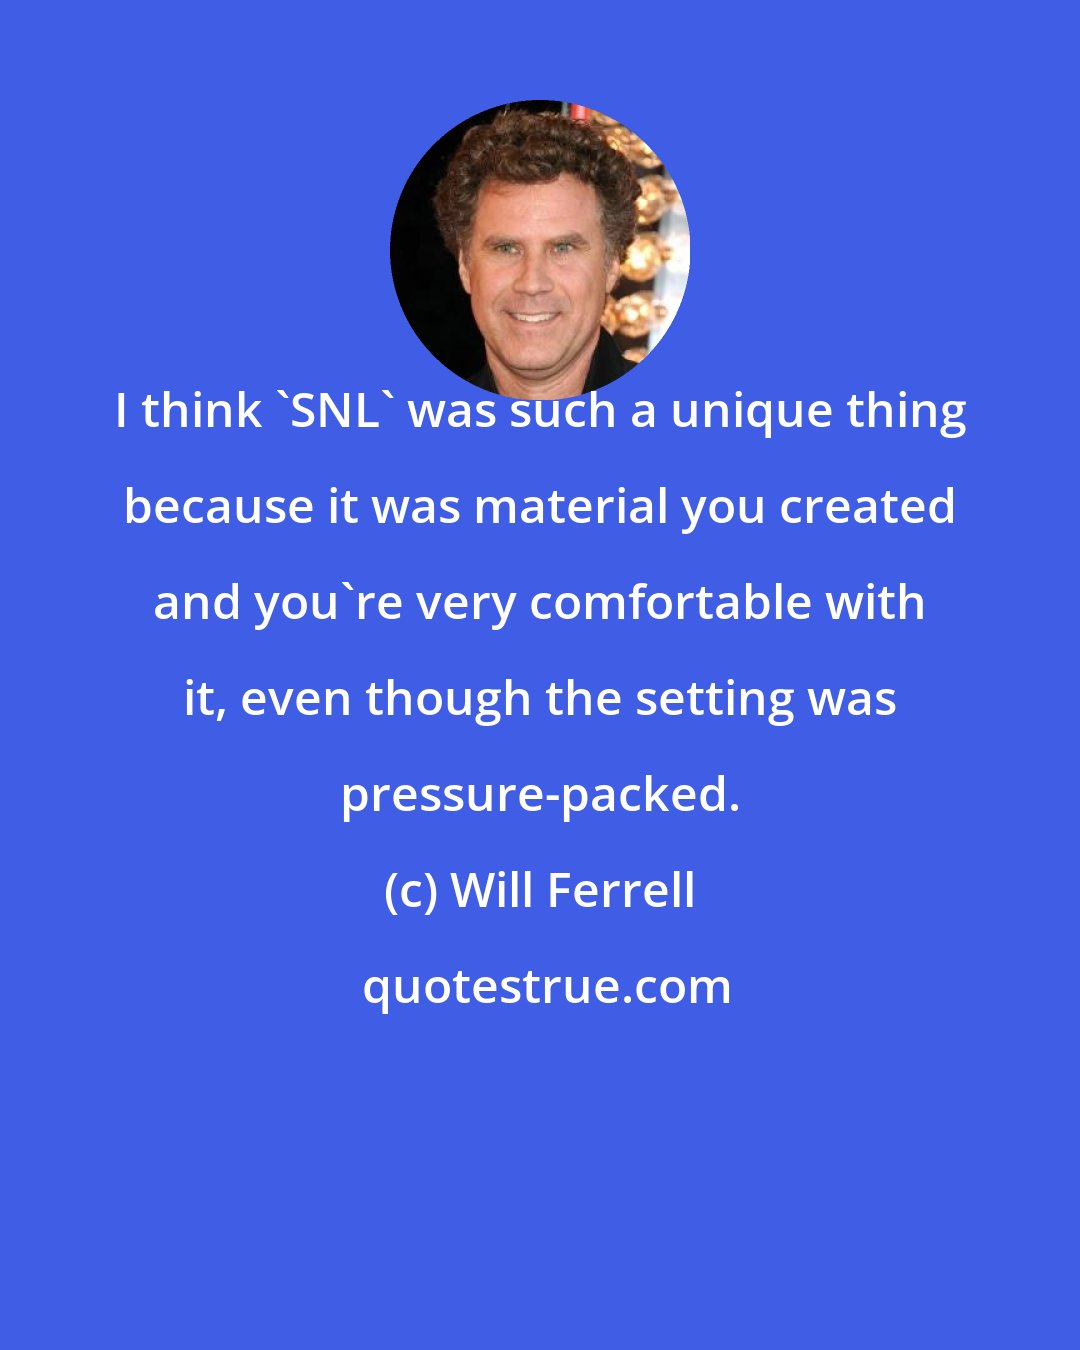 Will Ferrell: I think 'SNL' was such a unique thing because it was material you created and you're very comfortable with it, even though the setting was pressure-packed.